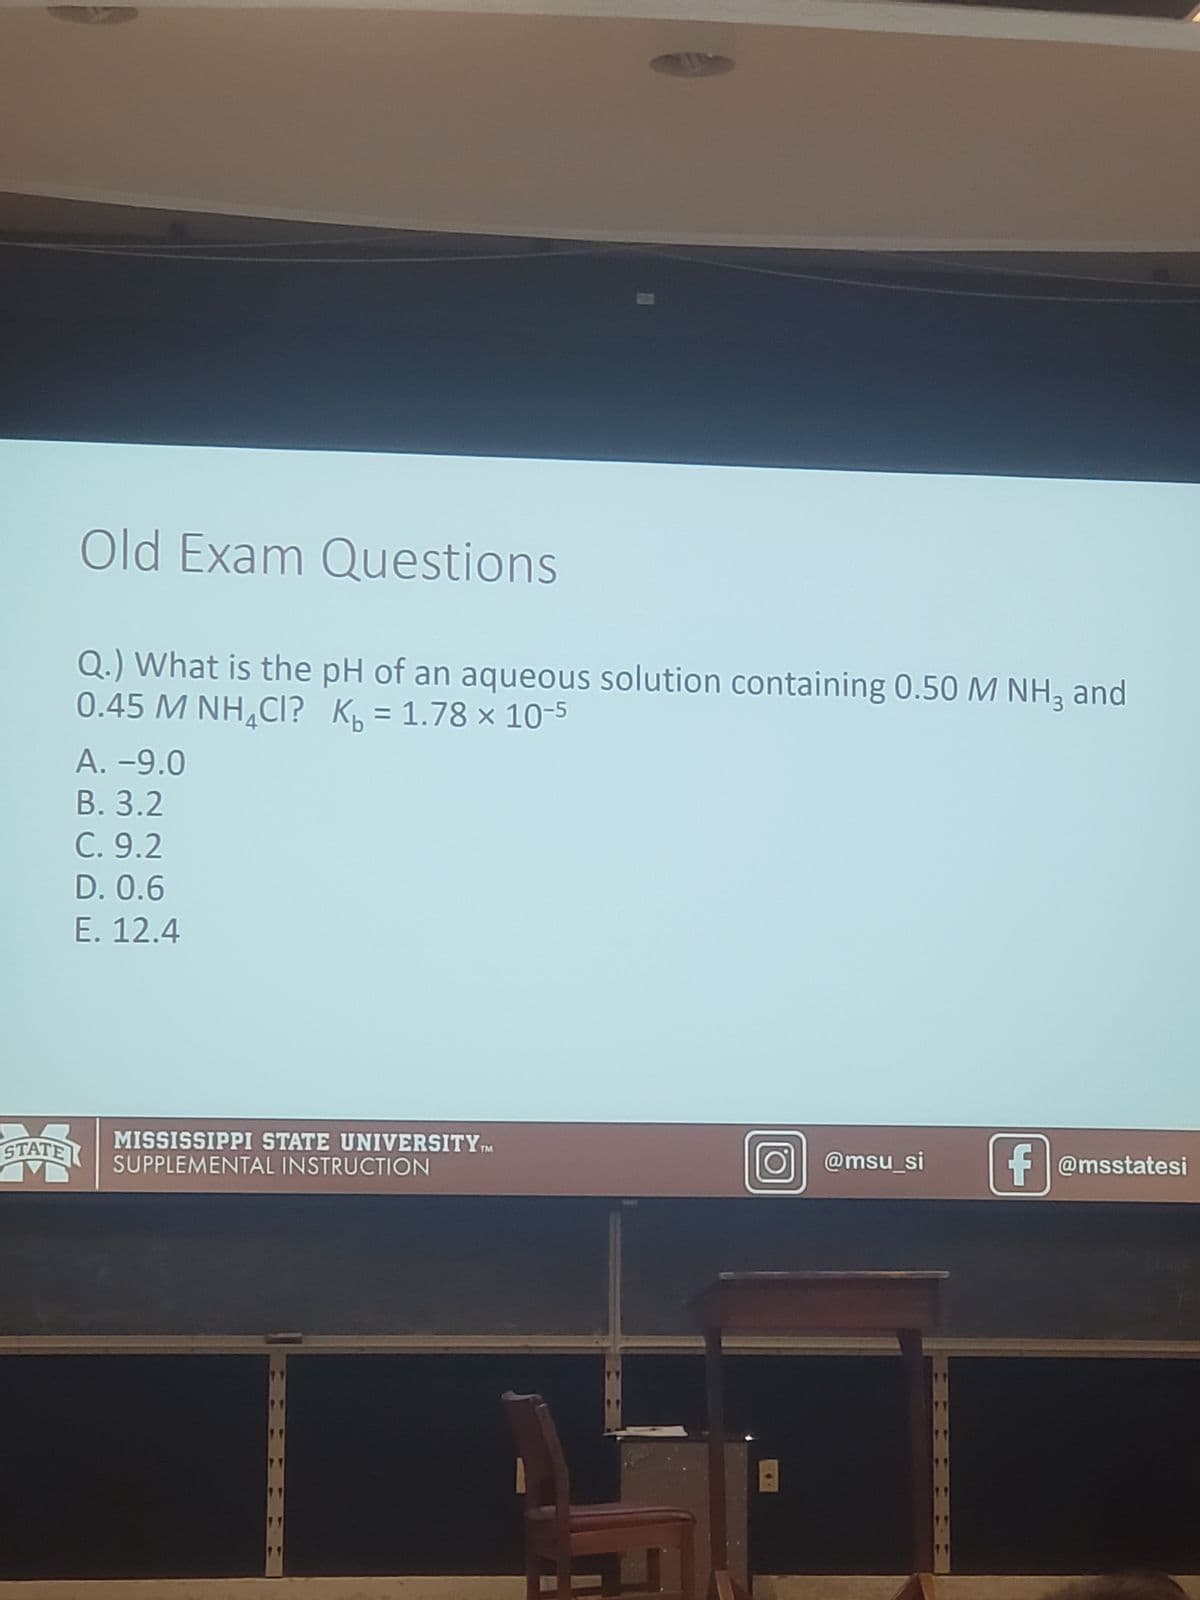 STATE
Old Exam Questions
Q.) What is the pH of an aqueous solution containing 0.50 M NH3 and
0.45 M NHẠCI? Kb = 1.78 × 10-5
A. -9.0
B. 3.2
C. 9.2
D. 0.6
E. 12.4
MISSISSIPPI STATE UNIVERSITYTM
SUPPLEMENTAL INSTRUCTION
11
O@msu_si f@msstatesi
ff